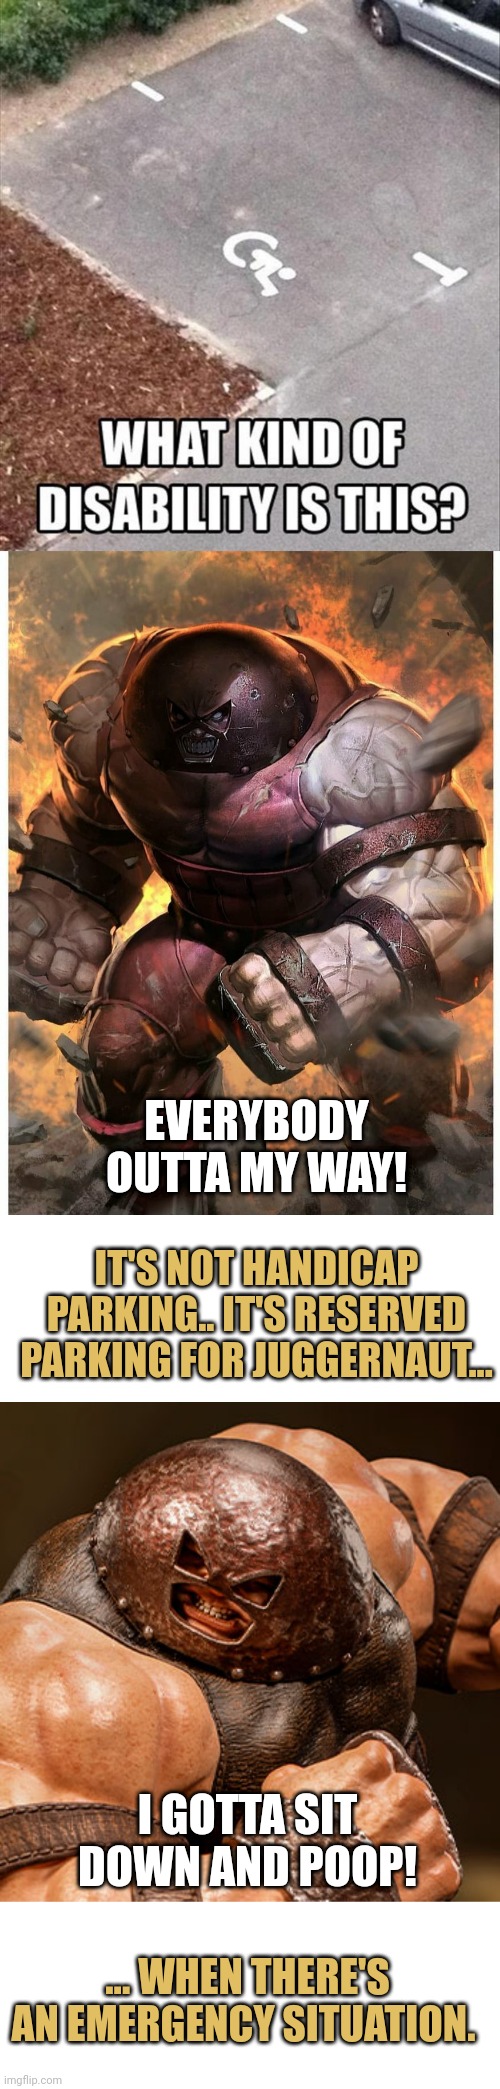 Handicapped or important person parking |  EVERYBODY OUTTA MY WAY! IT'S NOT HANDICAP PARKING.. IT'S RESERVED PARKING FOR JUGGERNAUT... I GOTTA SIT DOWN AND POOP! ... WHEN THERE'S AN EMERGENCY SITUATION. | image tagged in handicapped or important person parking | made w/ Imgflip meme maker